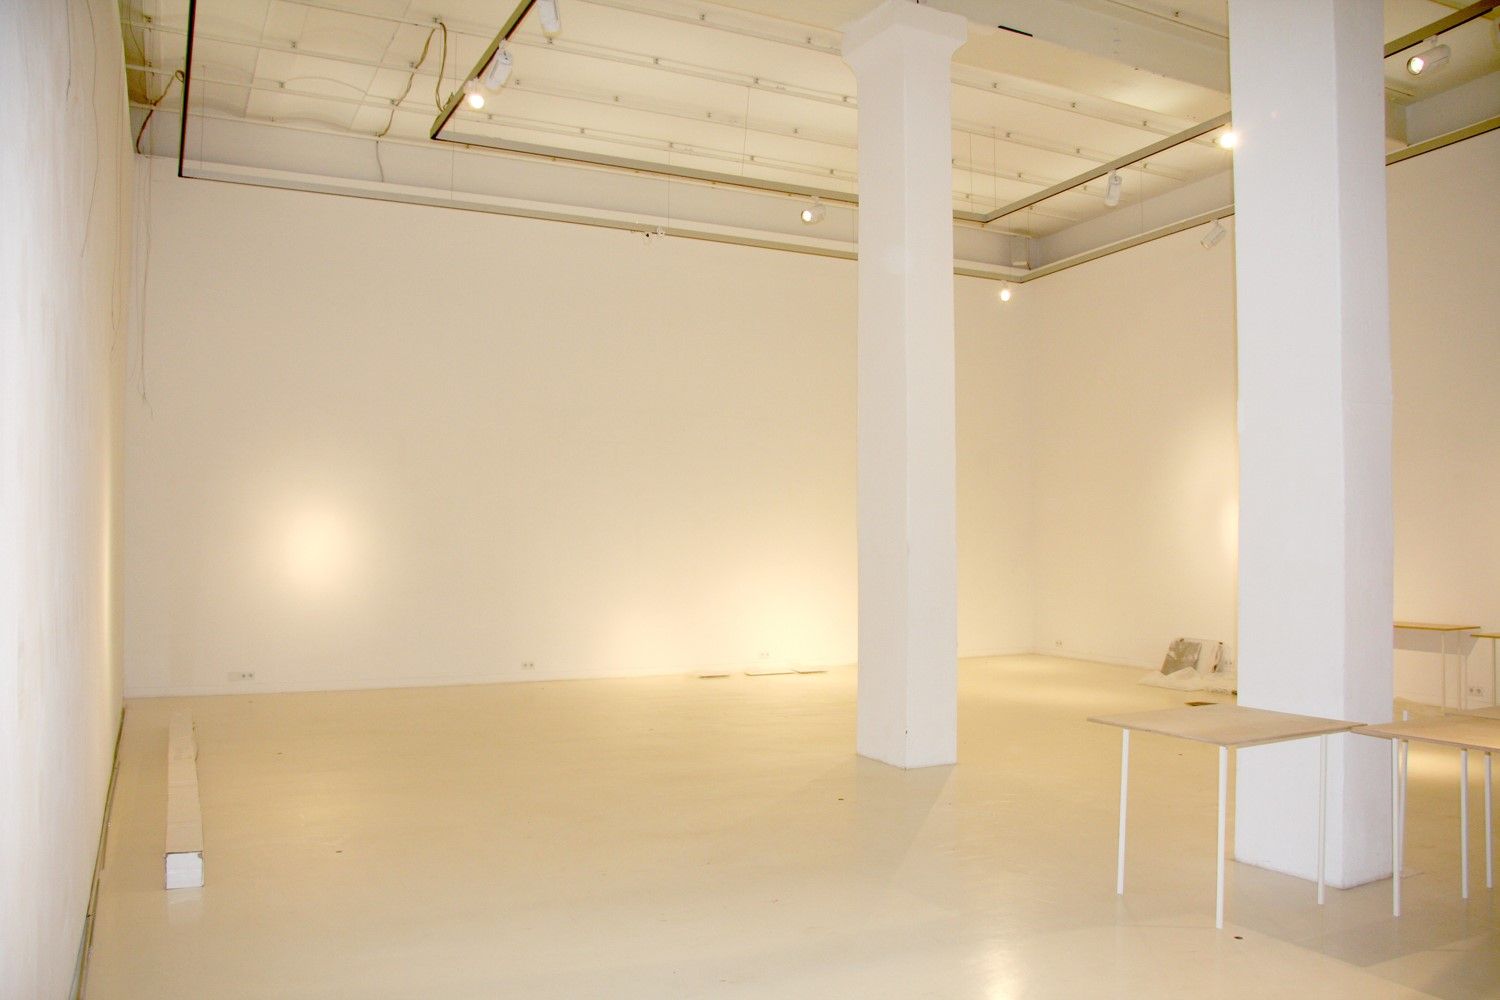 The empty rooms of the Aedes exhibition space (c) GRAFT